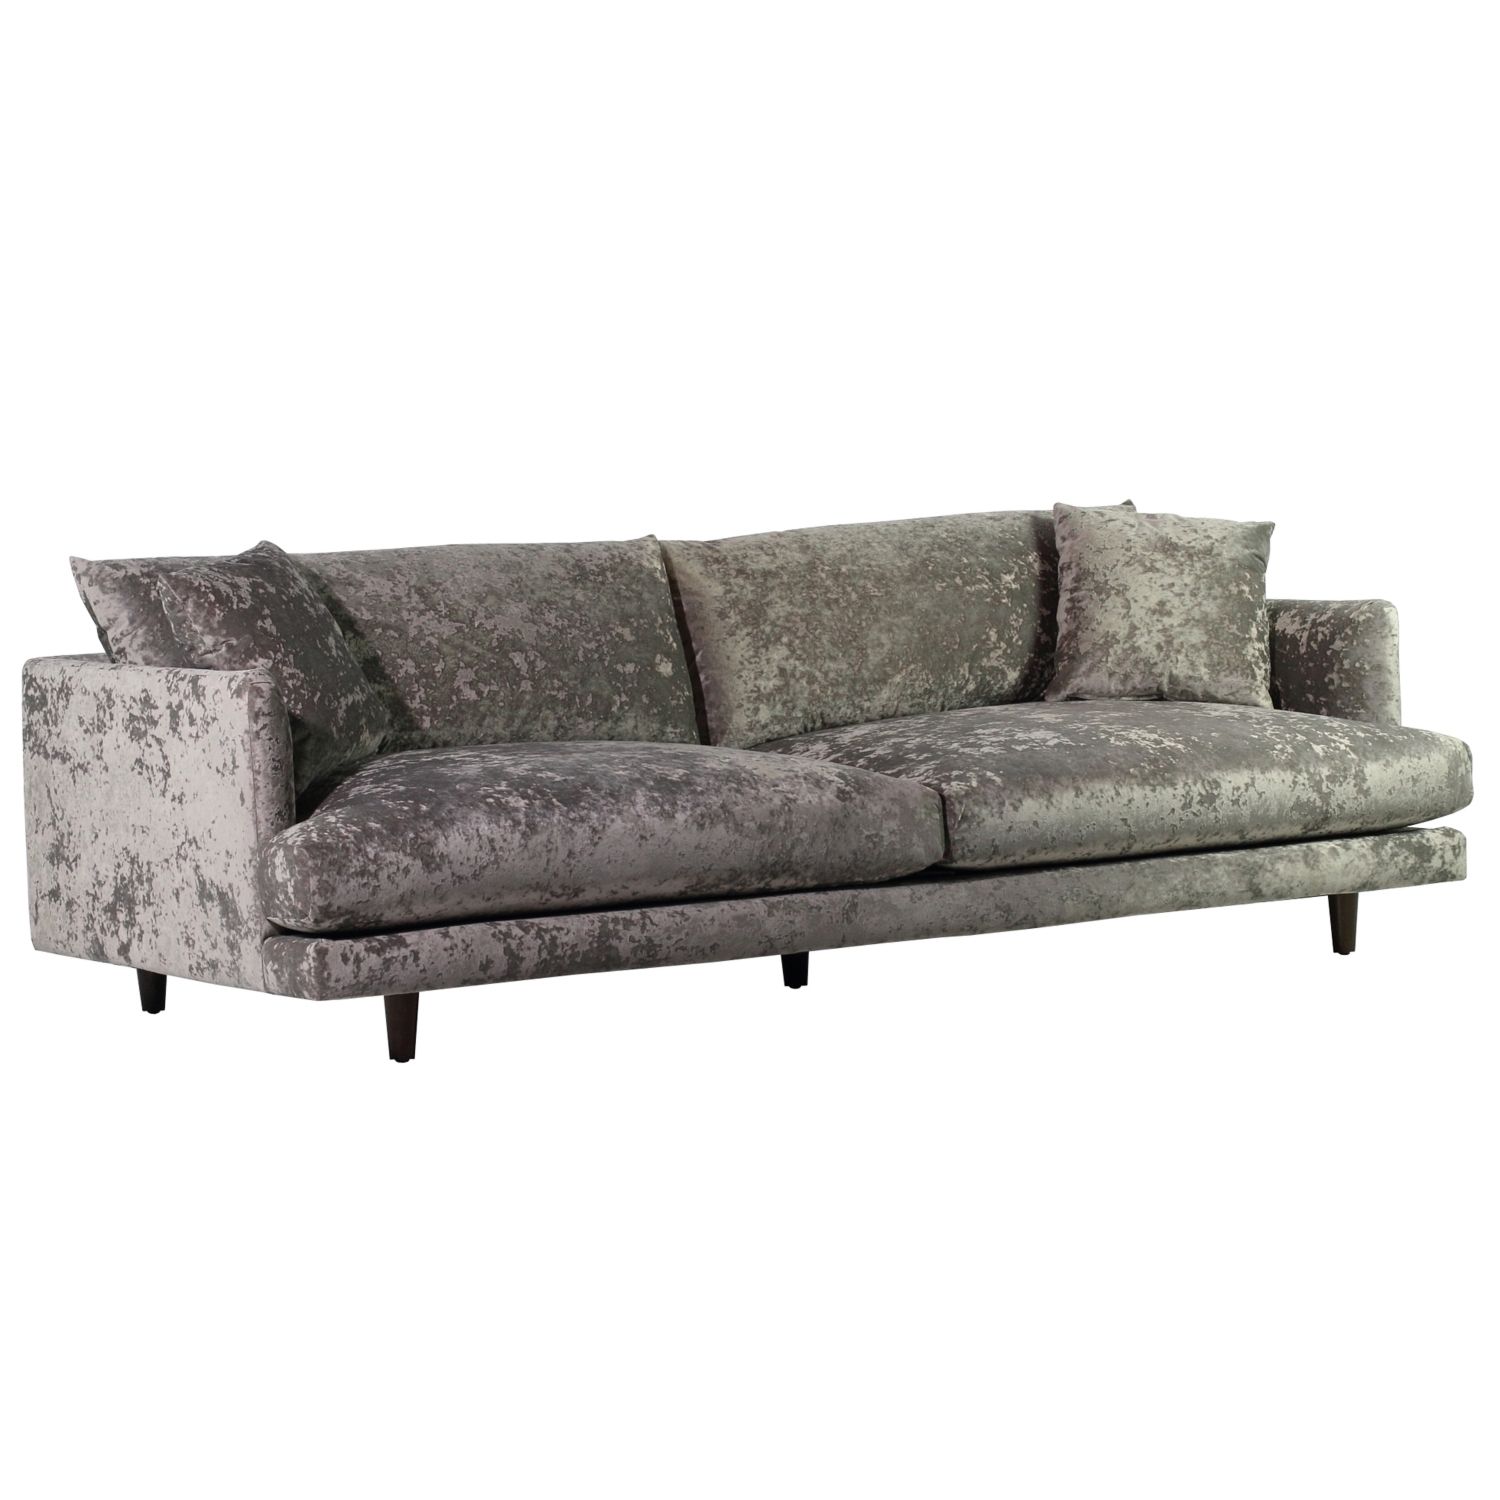 Delano Sofa – Brookline Gray – Spectra Home Furniture For Delano Smoke 3 Piece Sectionals (View 8 of 25)